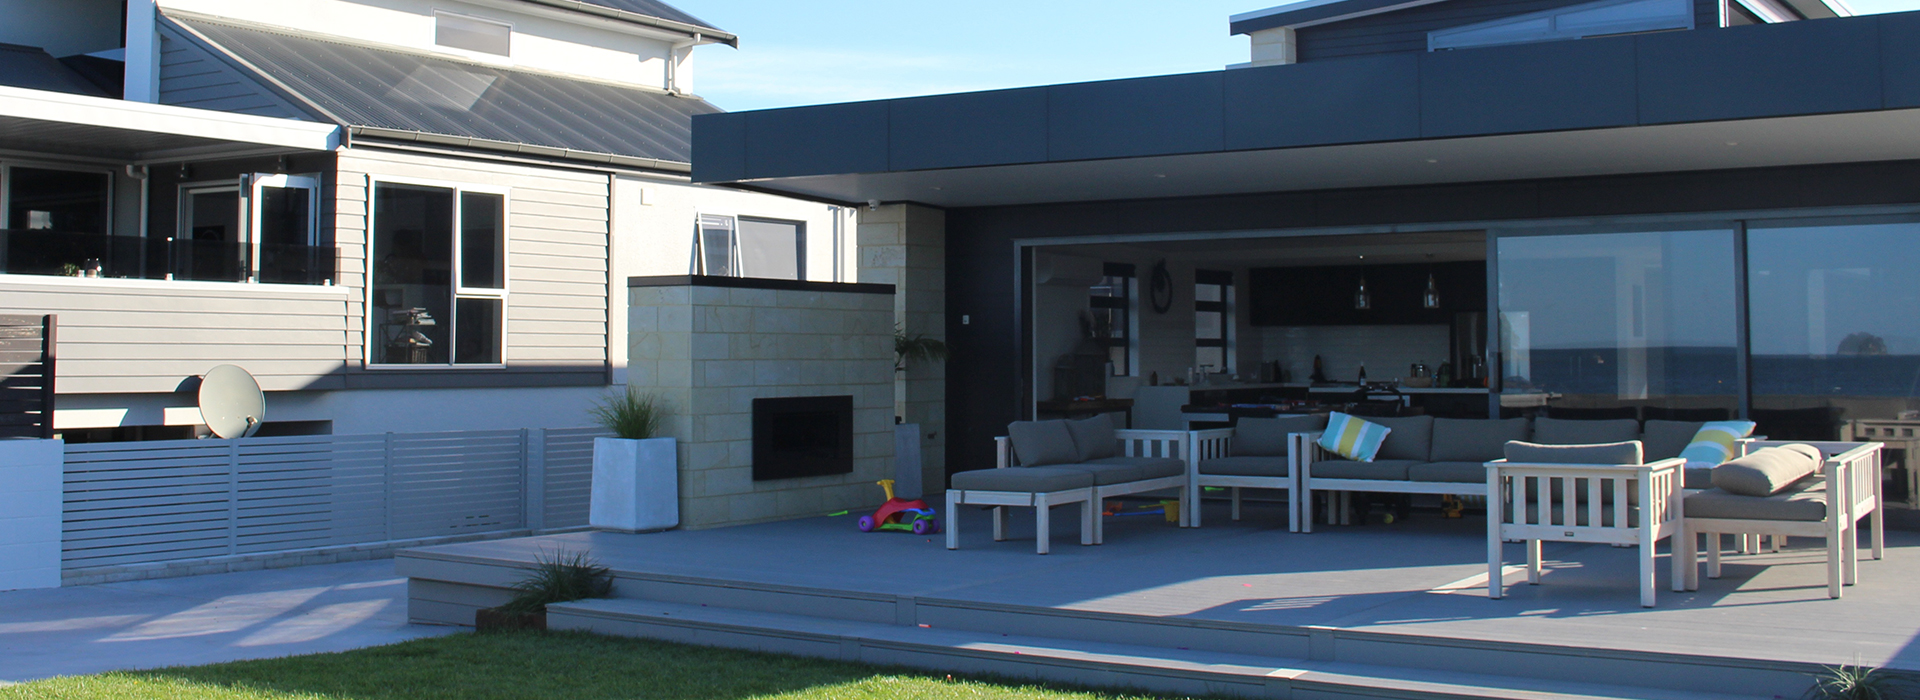 Contemporary style house back patio